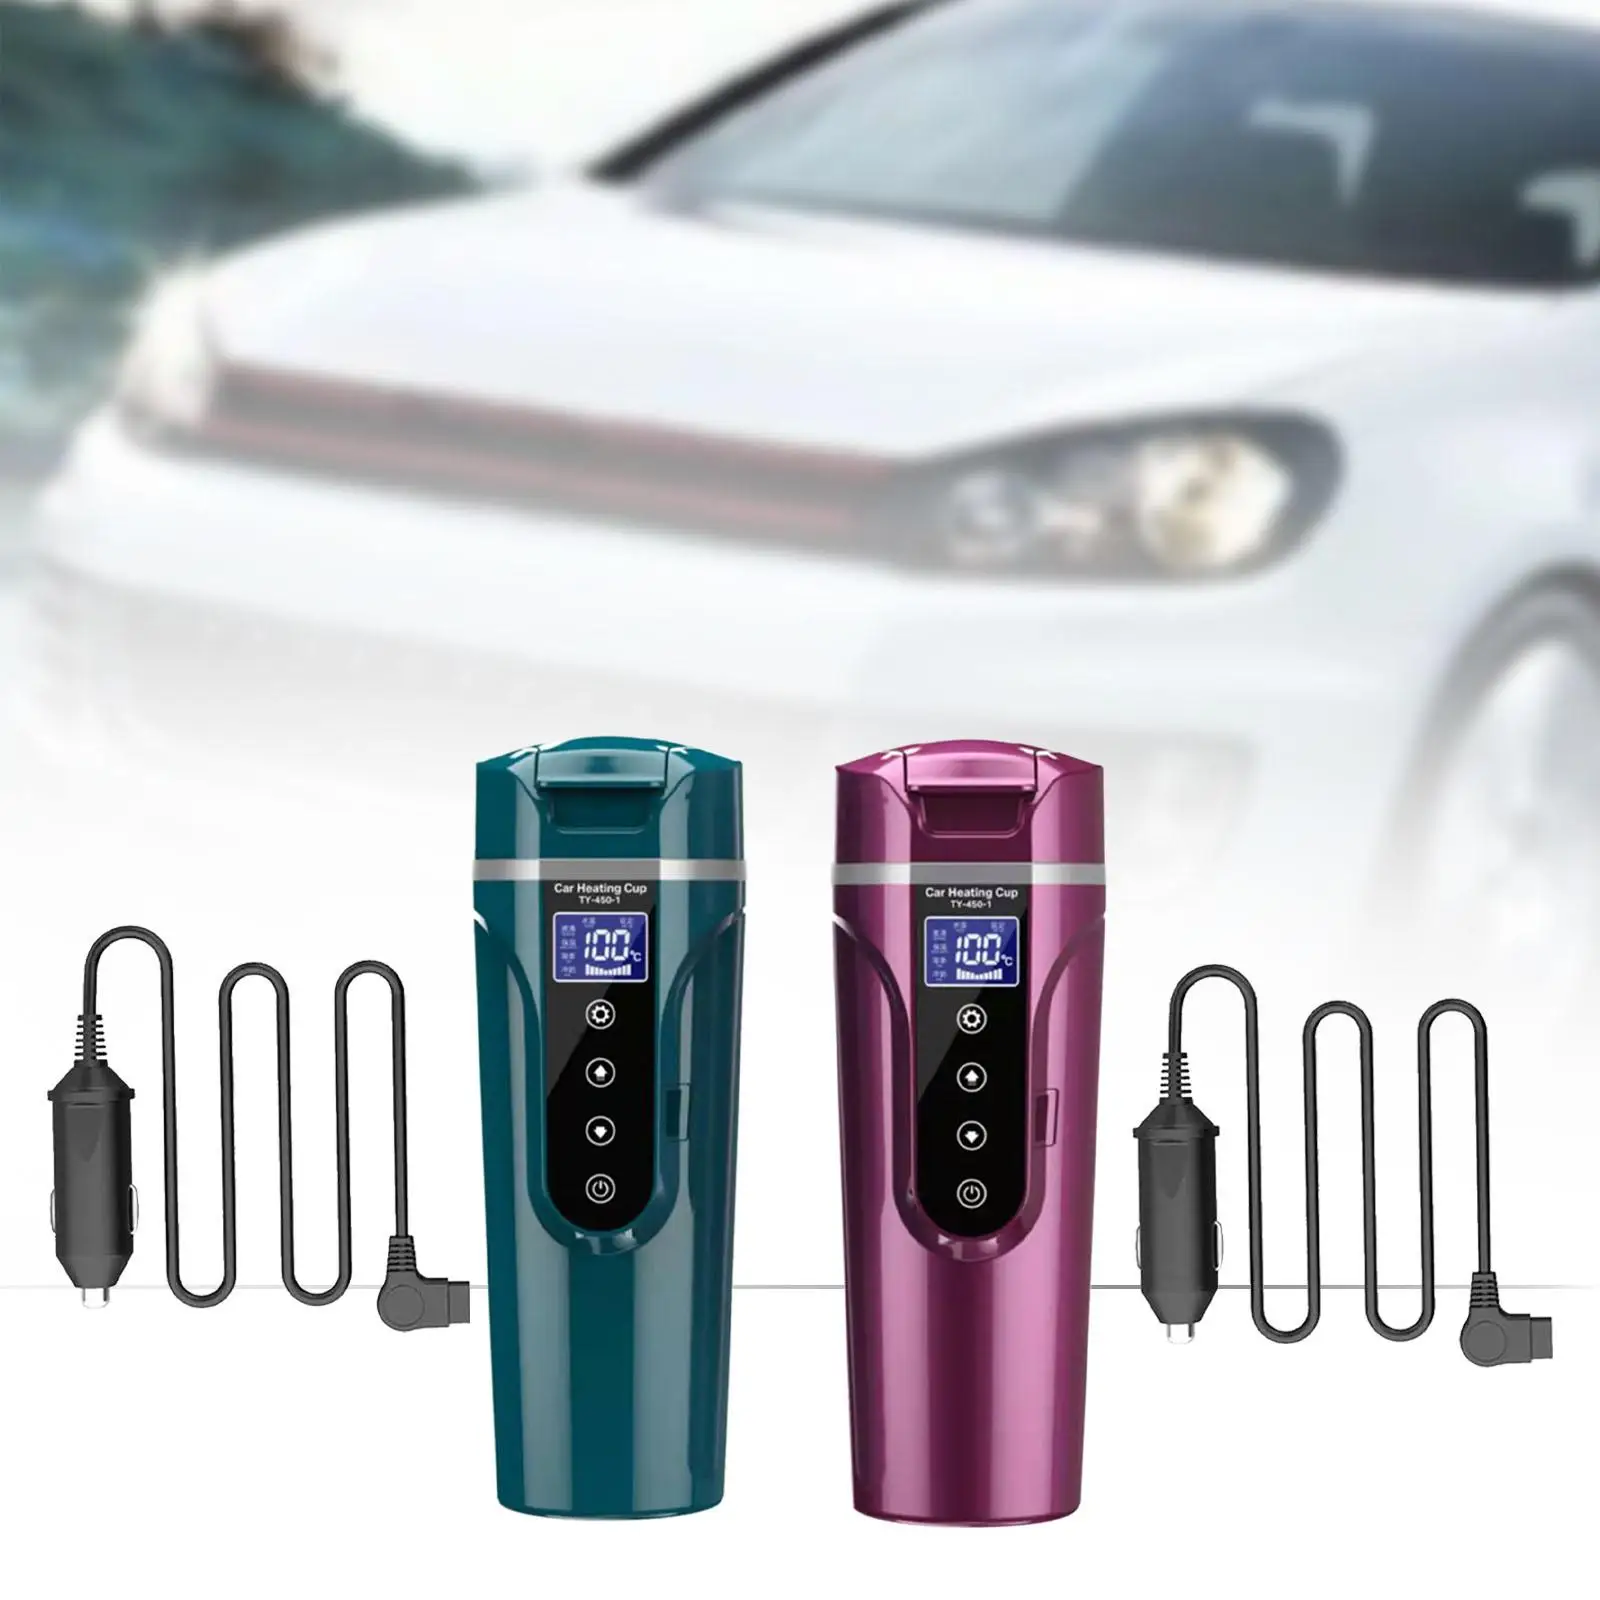 Car Heating Cup Fast Boiling 24V/12V Electric Travel Kettle Car Travel Kettle Water Boiler for Tea Milk Water Coffee Outdoor